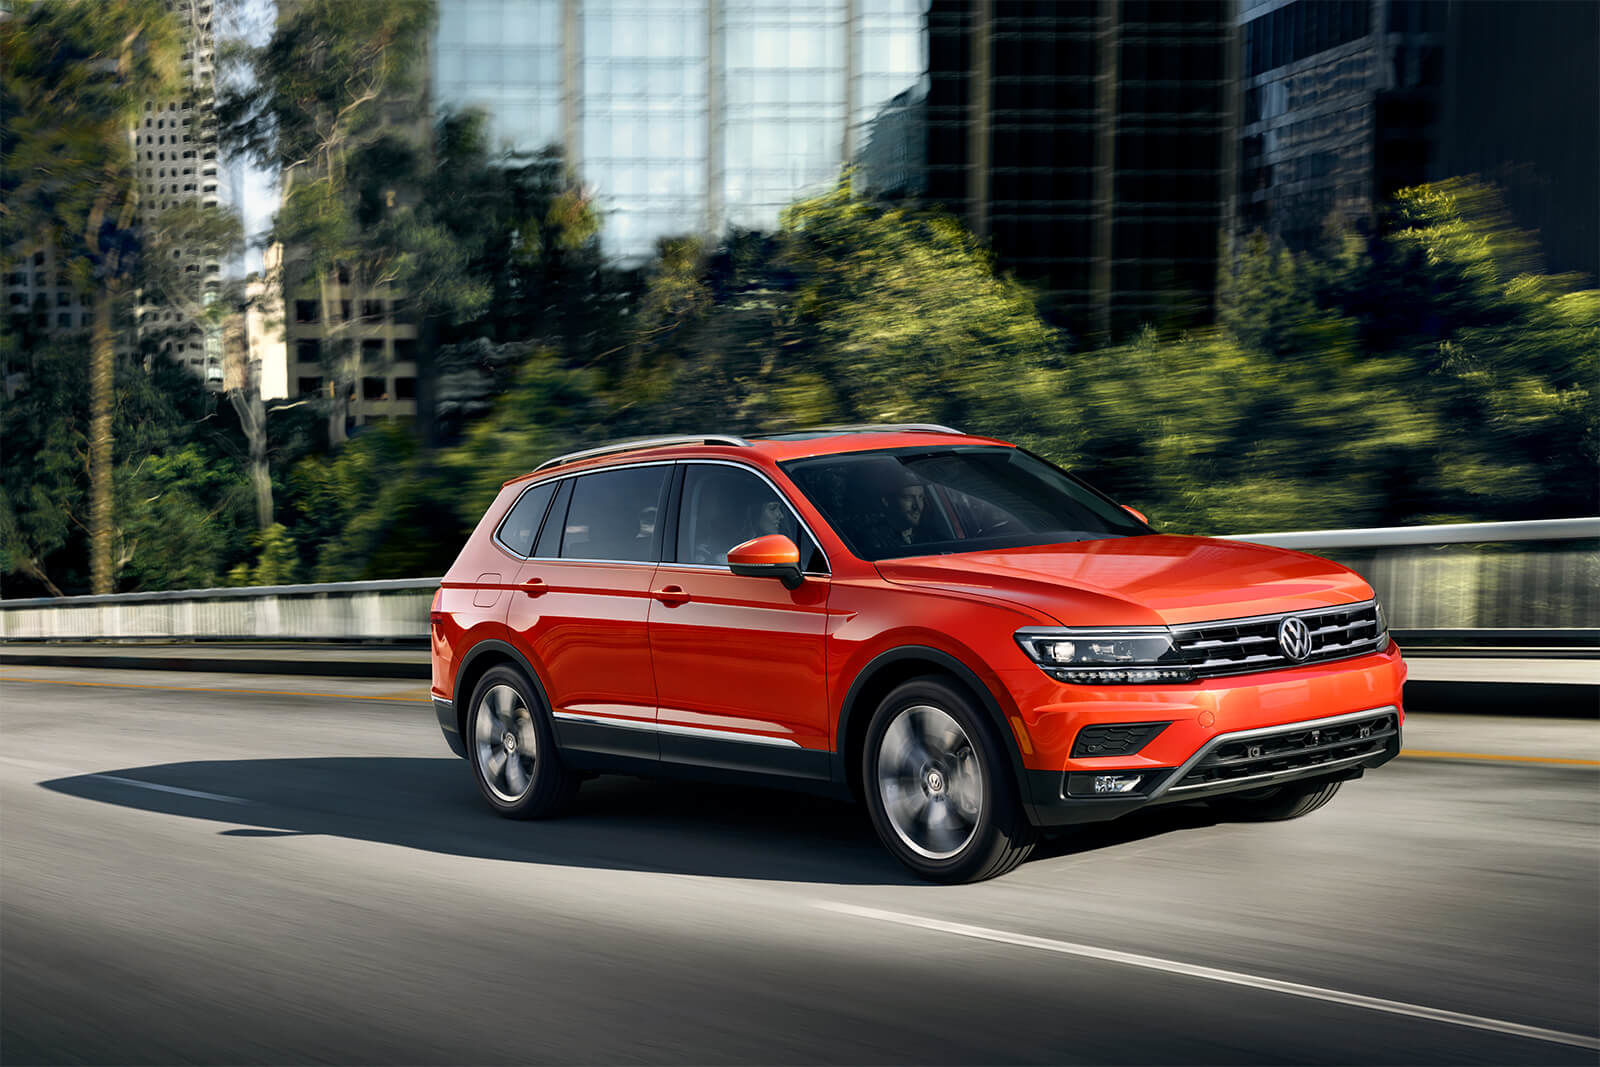 The 2019 Volkswagen Tiguan: A Different Approach to the Compact SUV